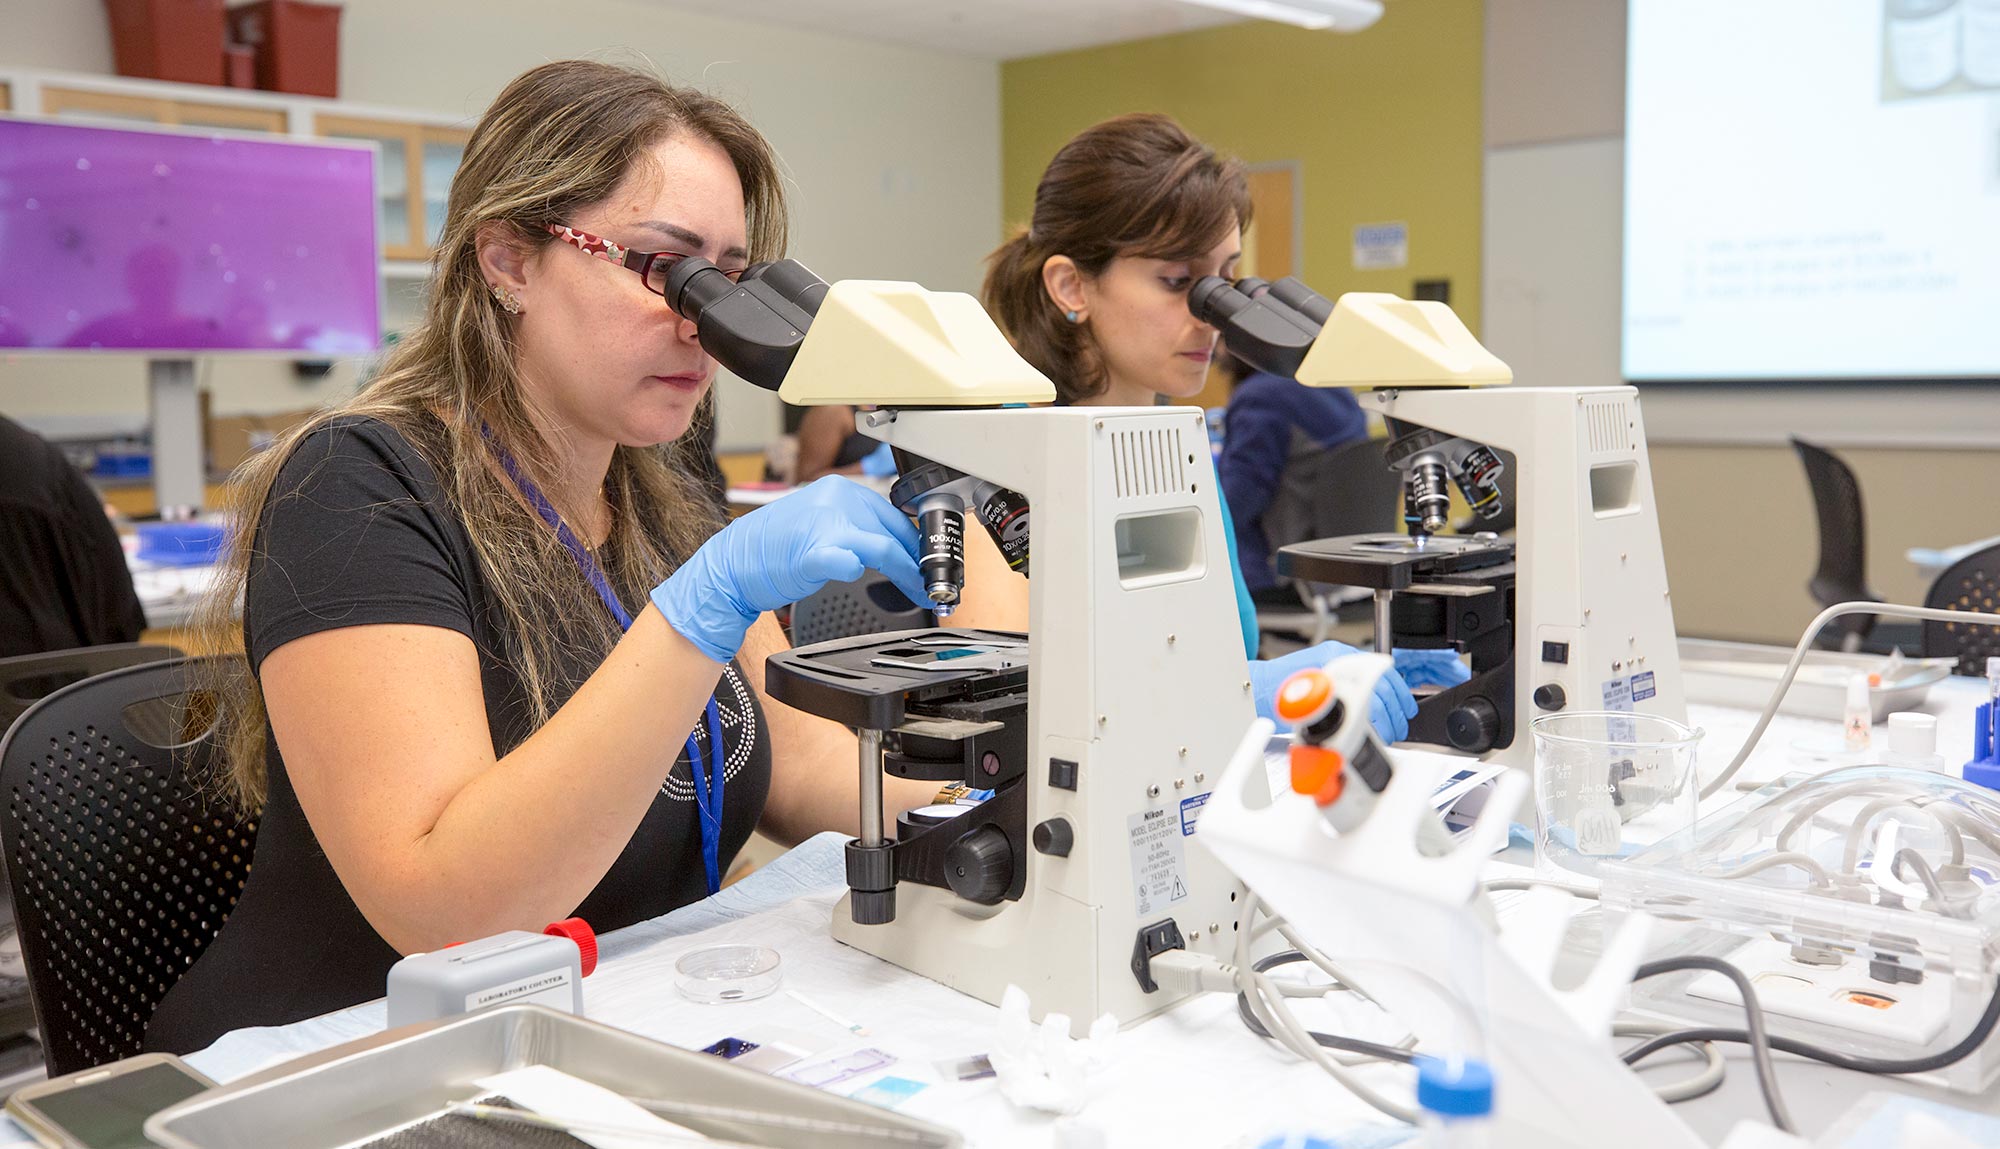 Students look through microscopes in a laboratory setting.